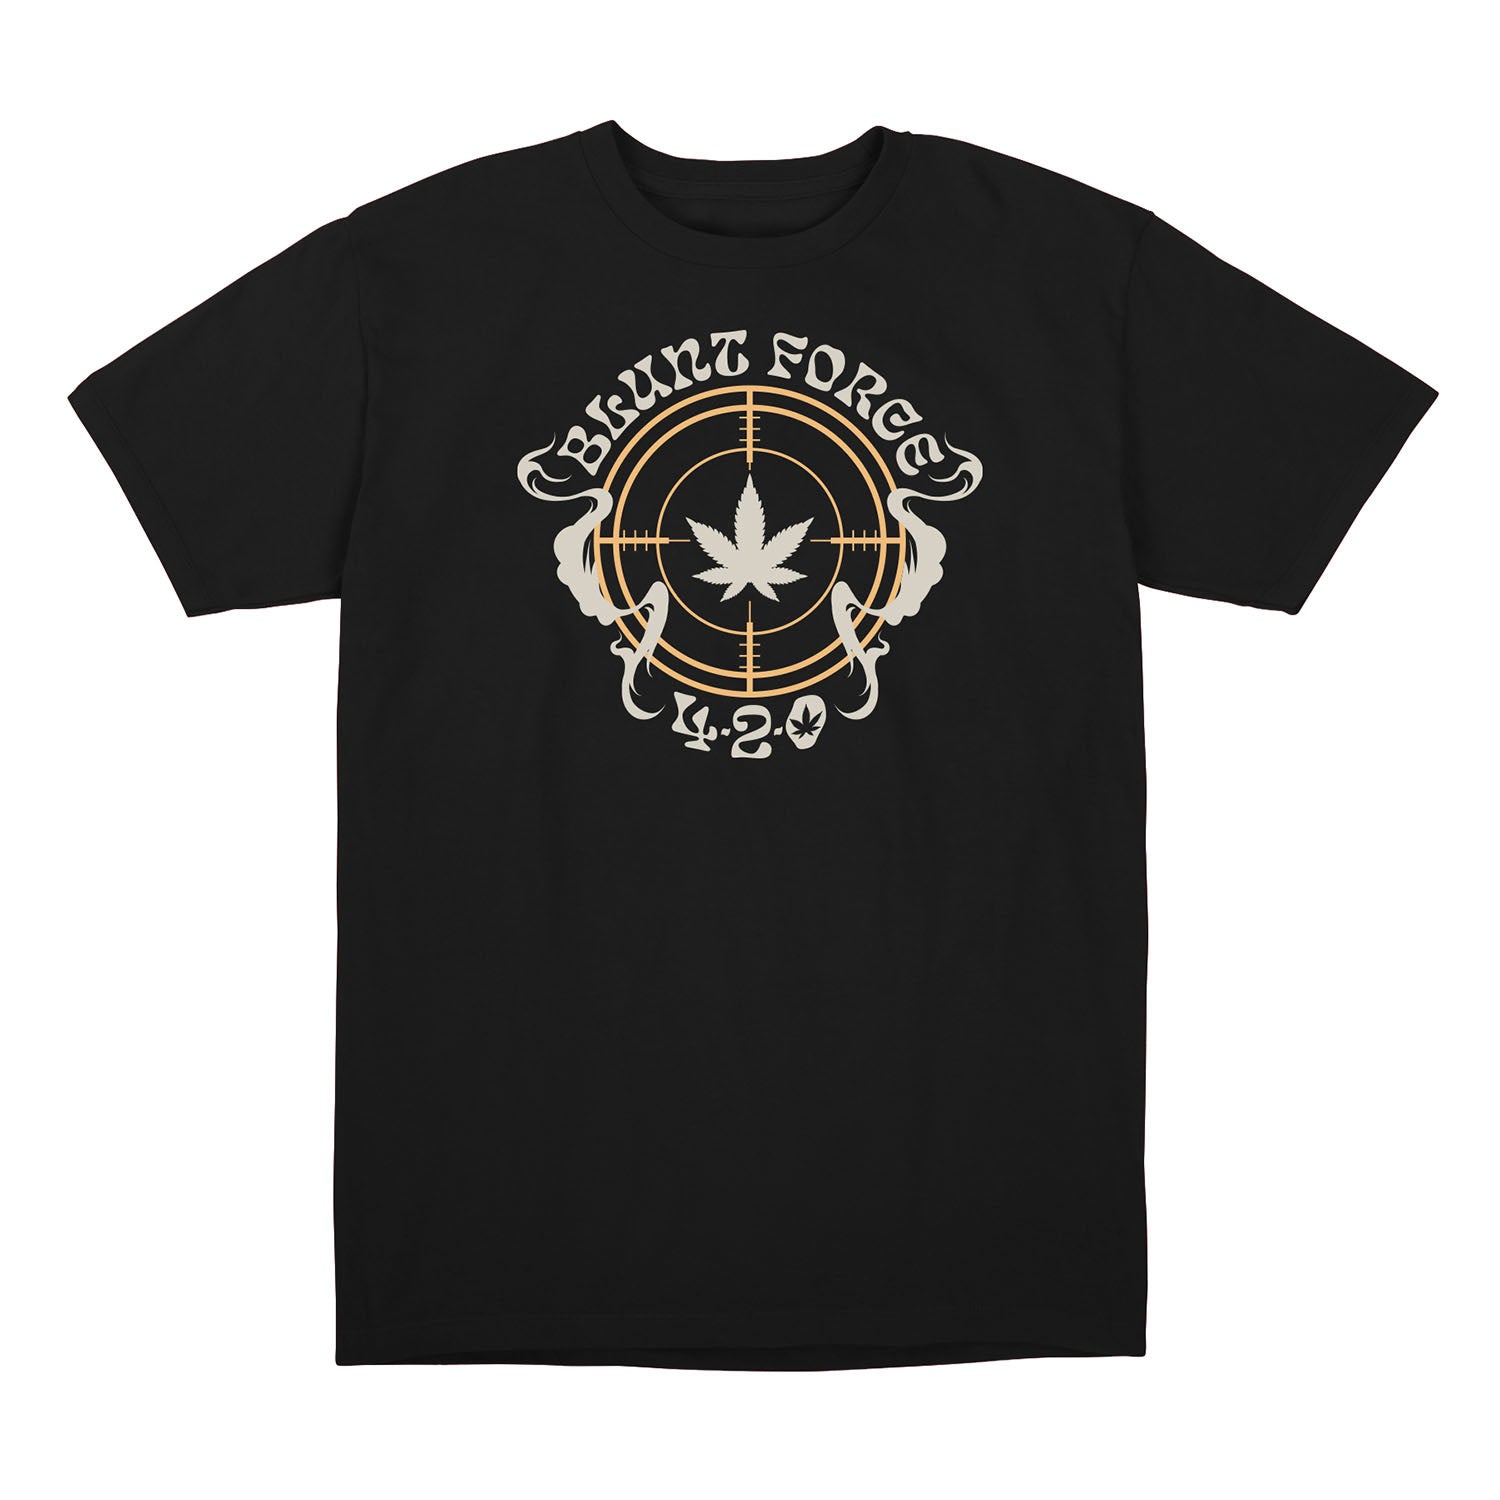 Call of Duty Blunt Force Black T-Shirt - Front View